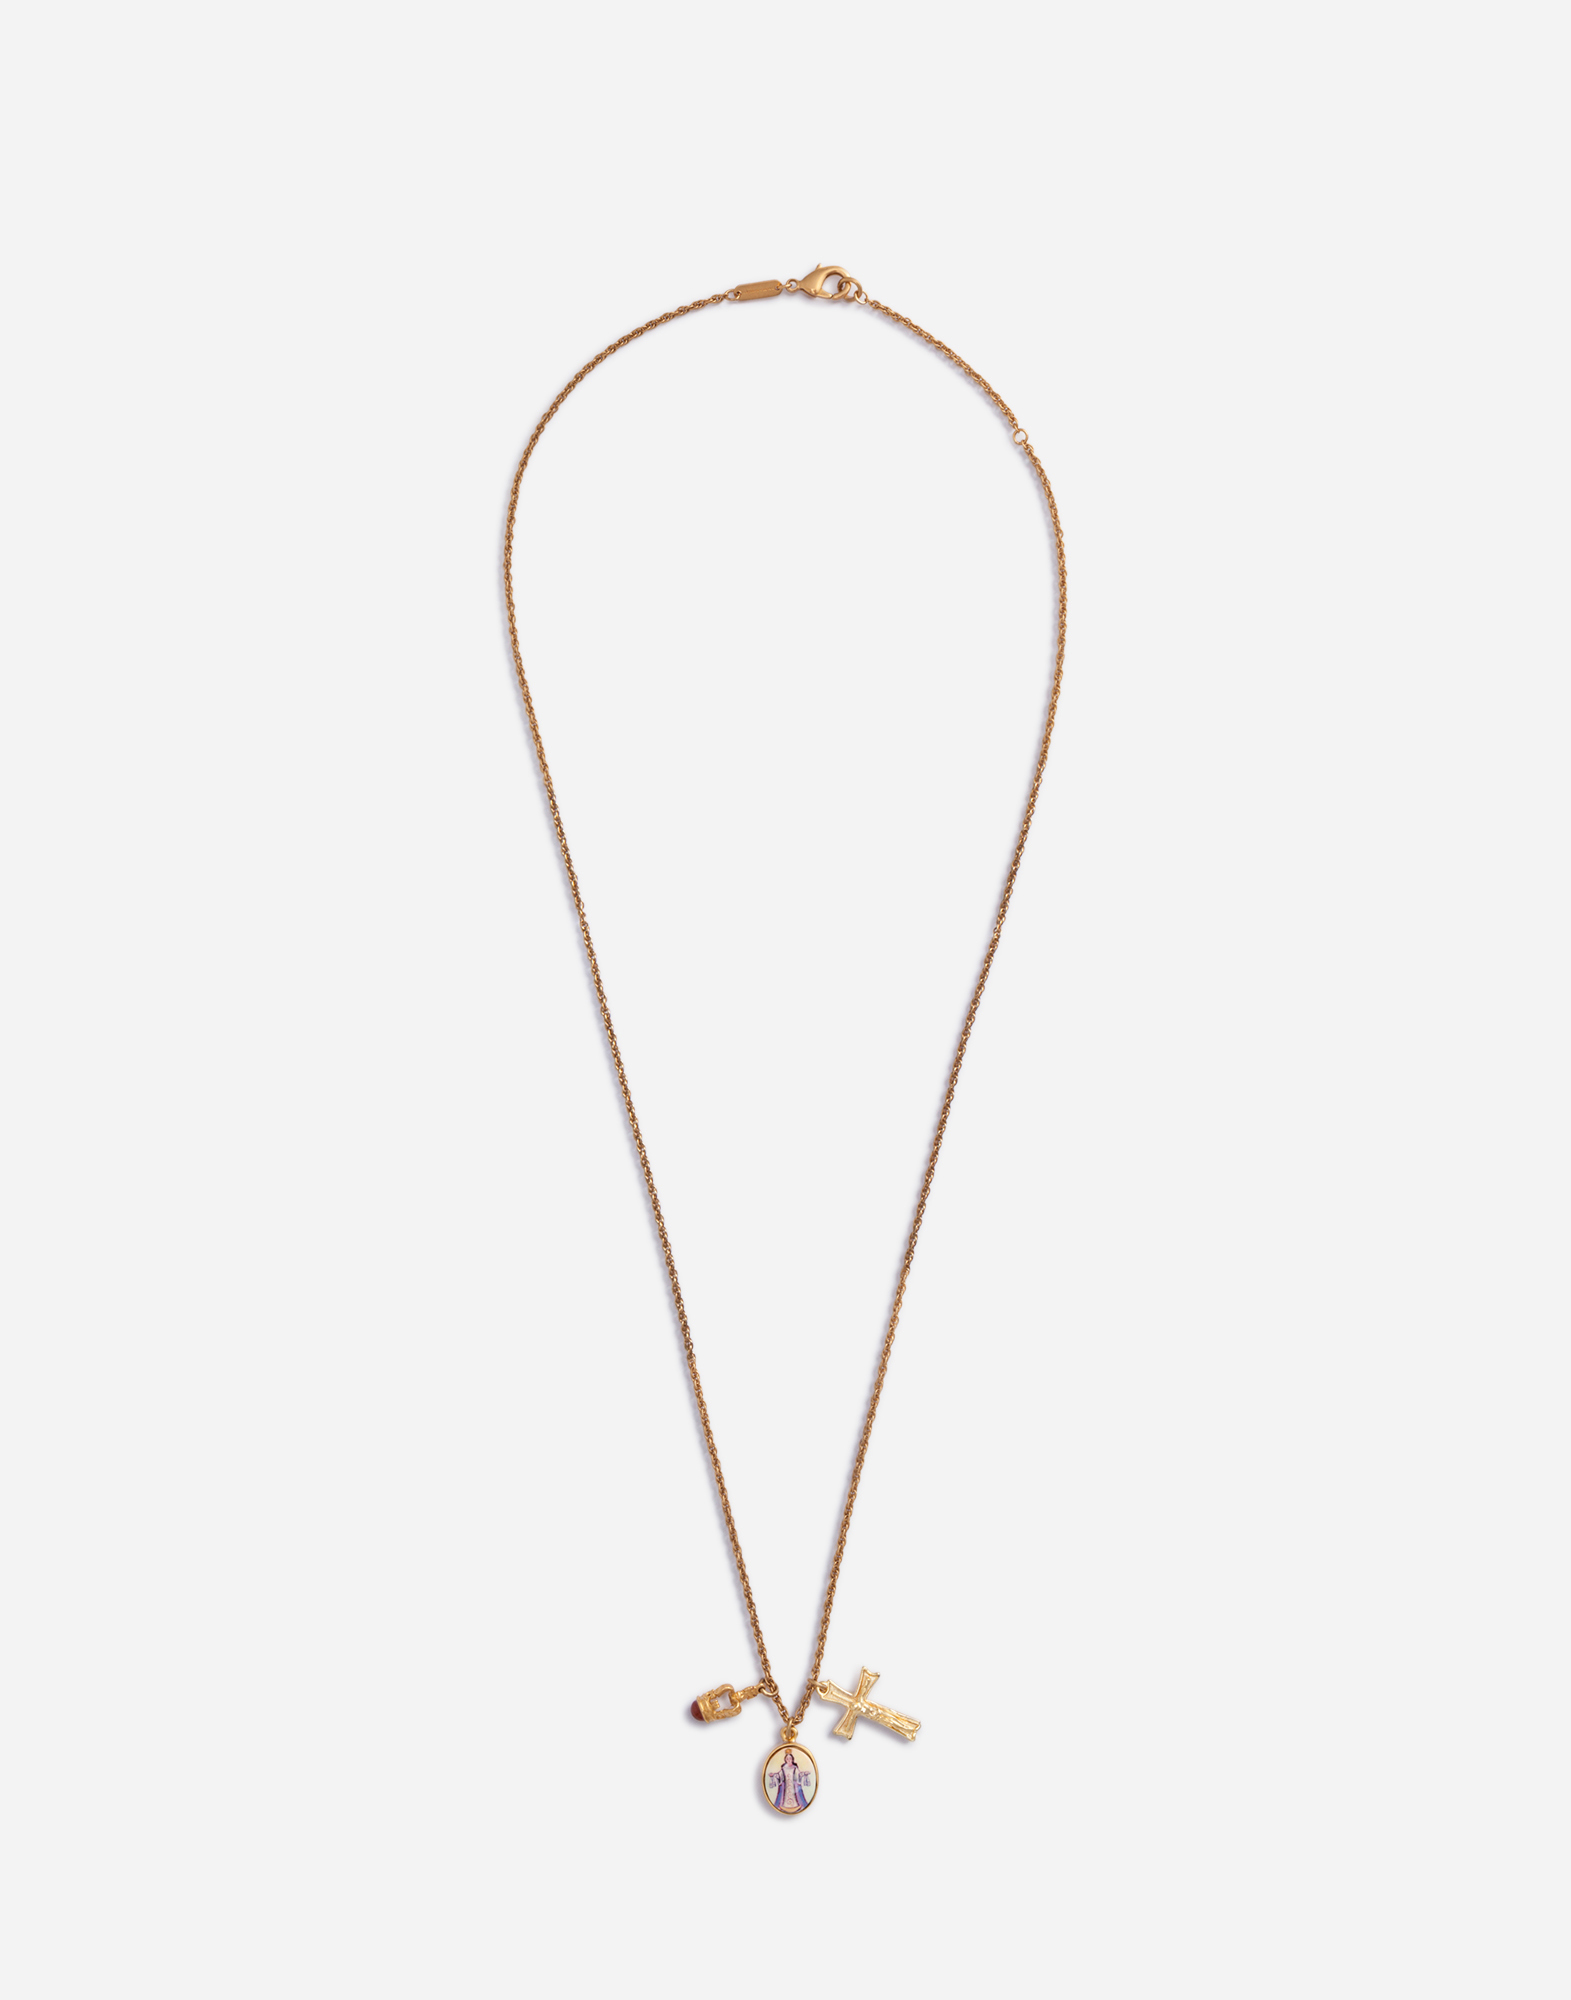 Necklace with pendants in Gold